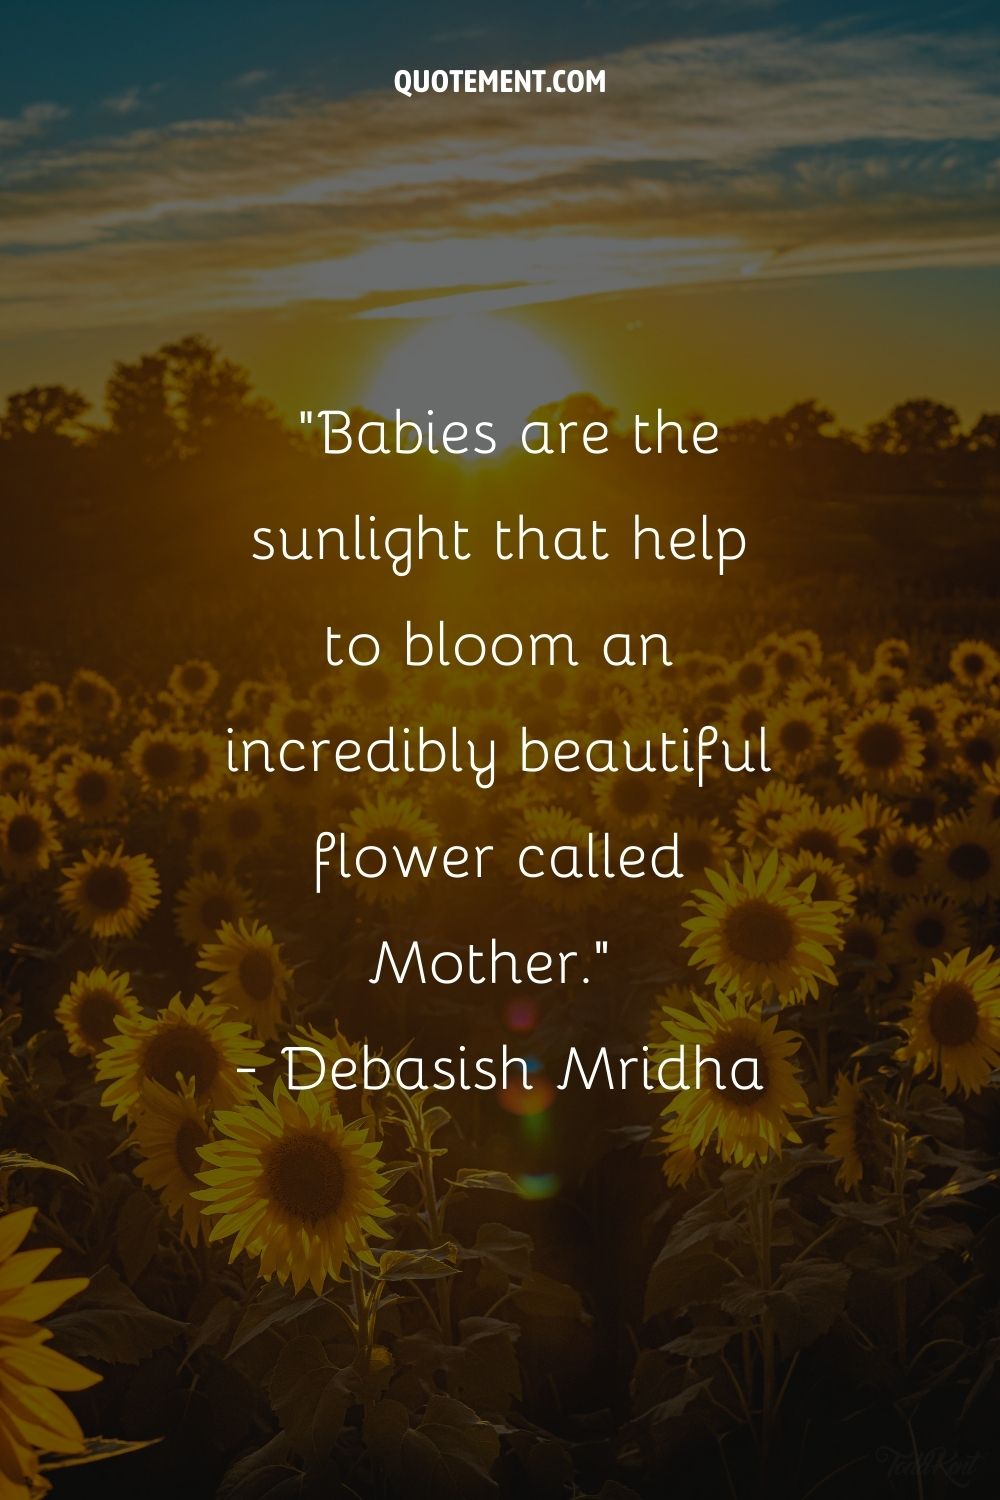 Babies are the sunlight that help to bloom an incredibly beautiful flower called Mother.